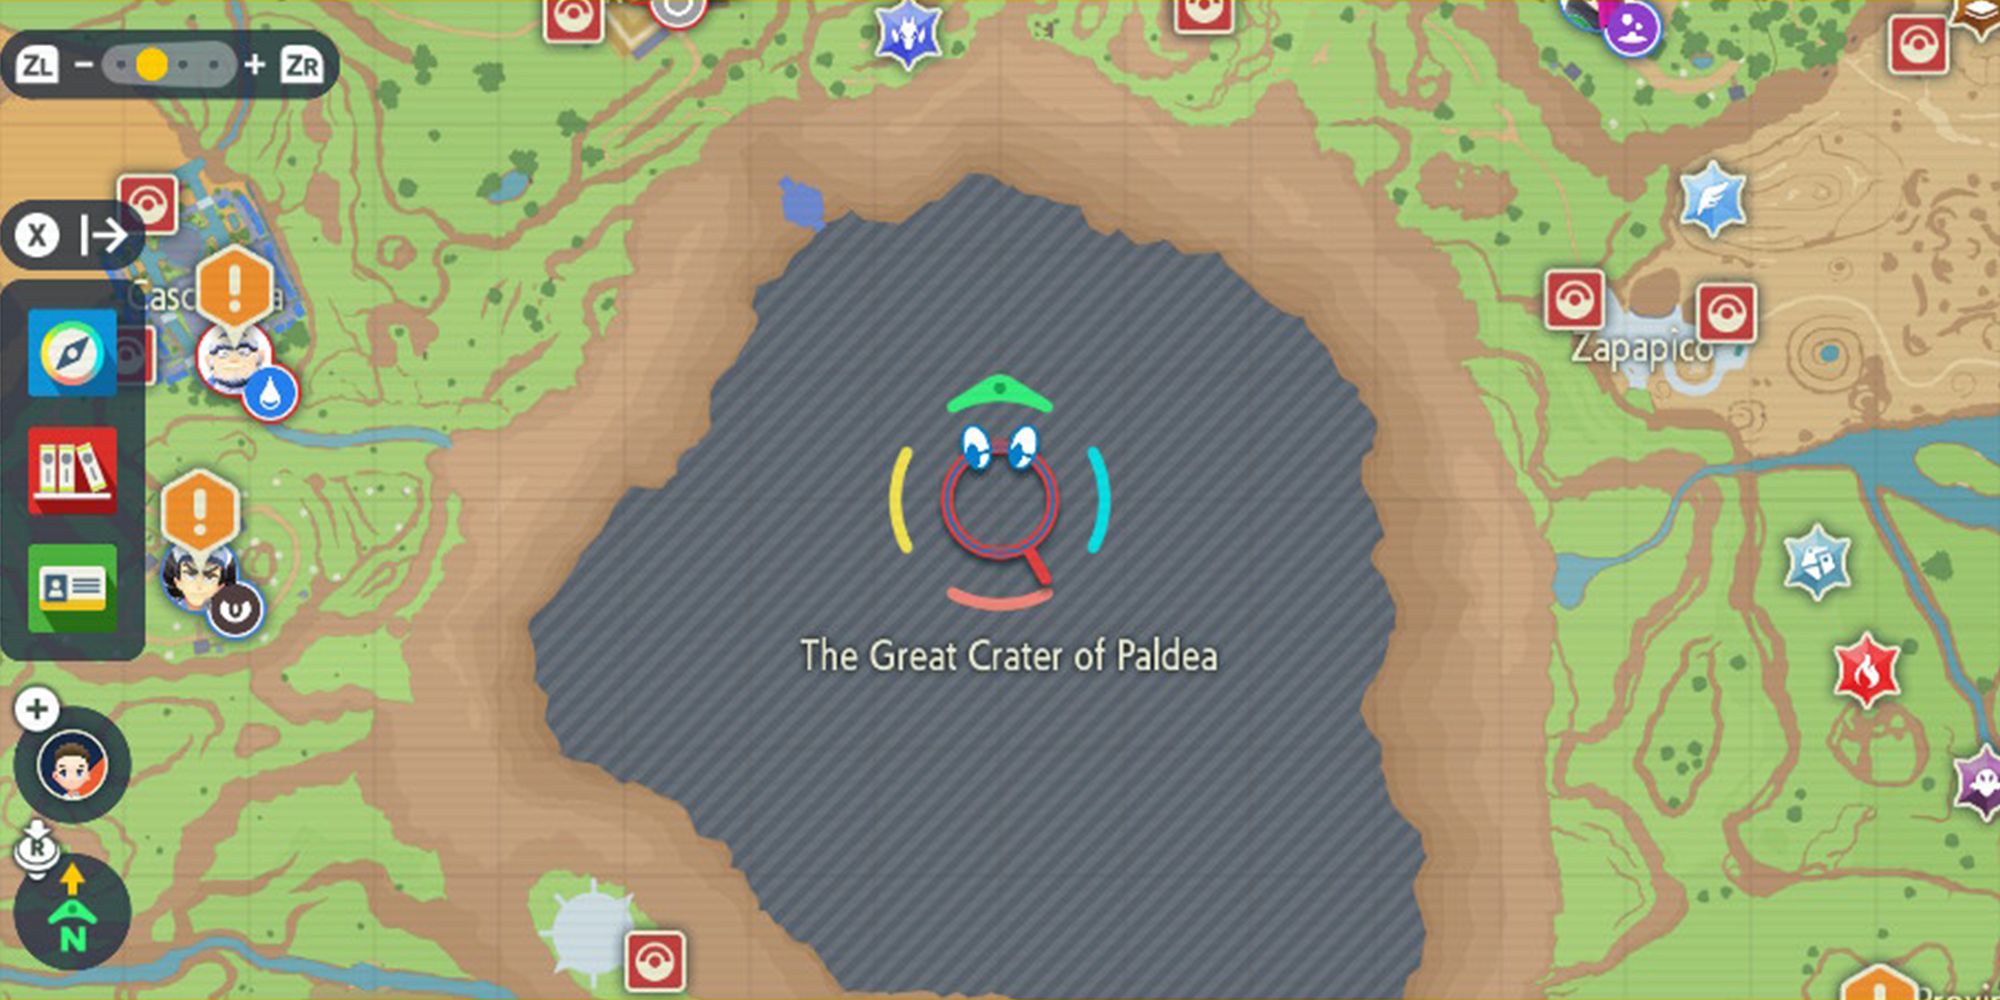 Screenshot Of The Great Crater Of Paldea In Pokemon Scarlet & Violet